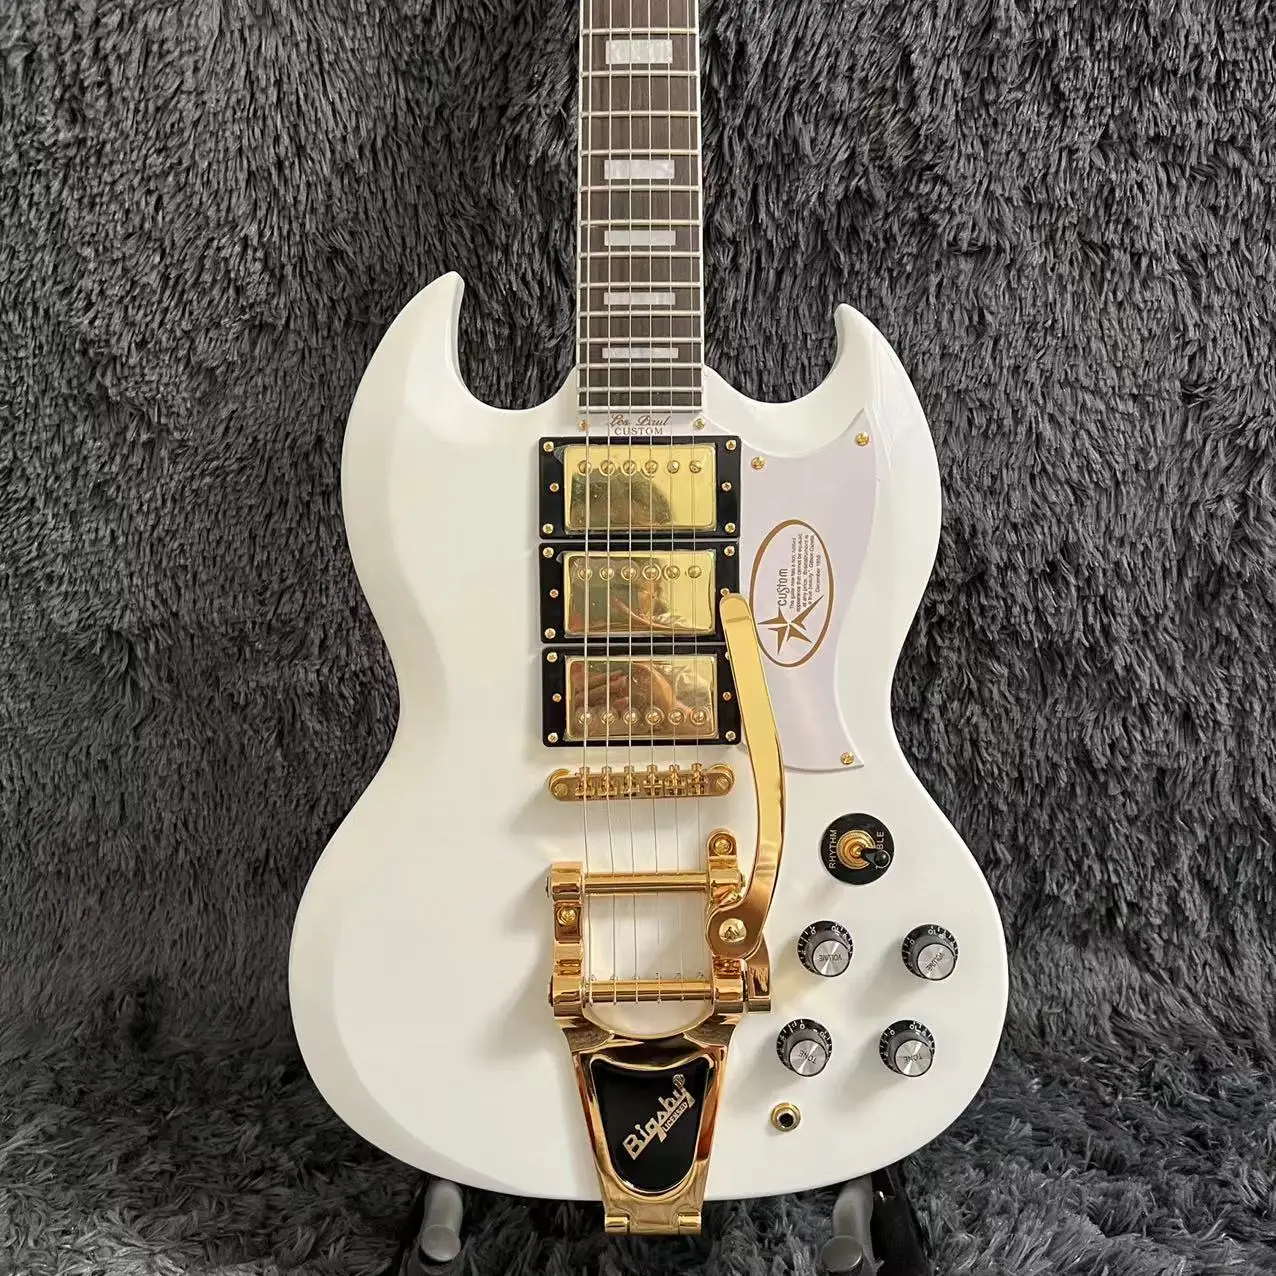 

SG Electric Guitar Rosewood Fingerboard Golden Hardware with Bigsby Tremolo System 3 Pickups Free Shipping